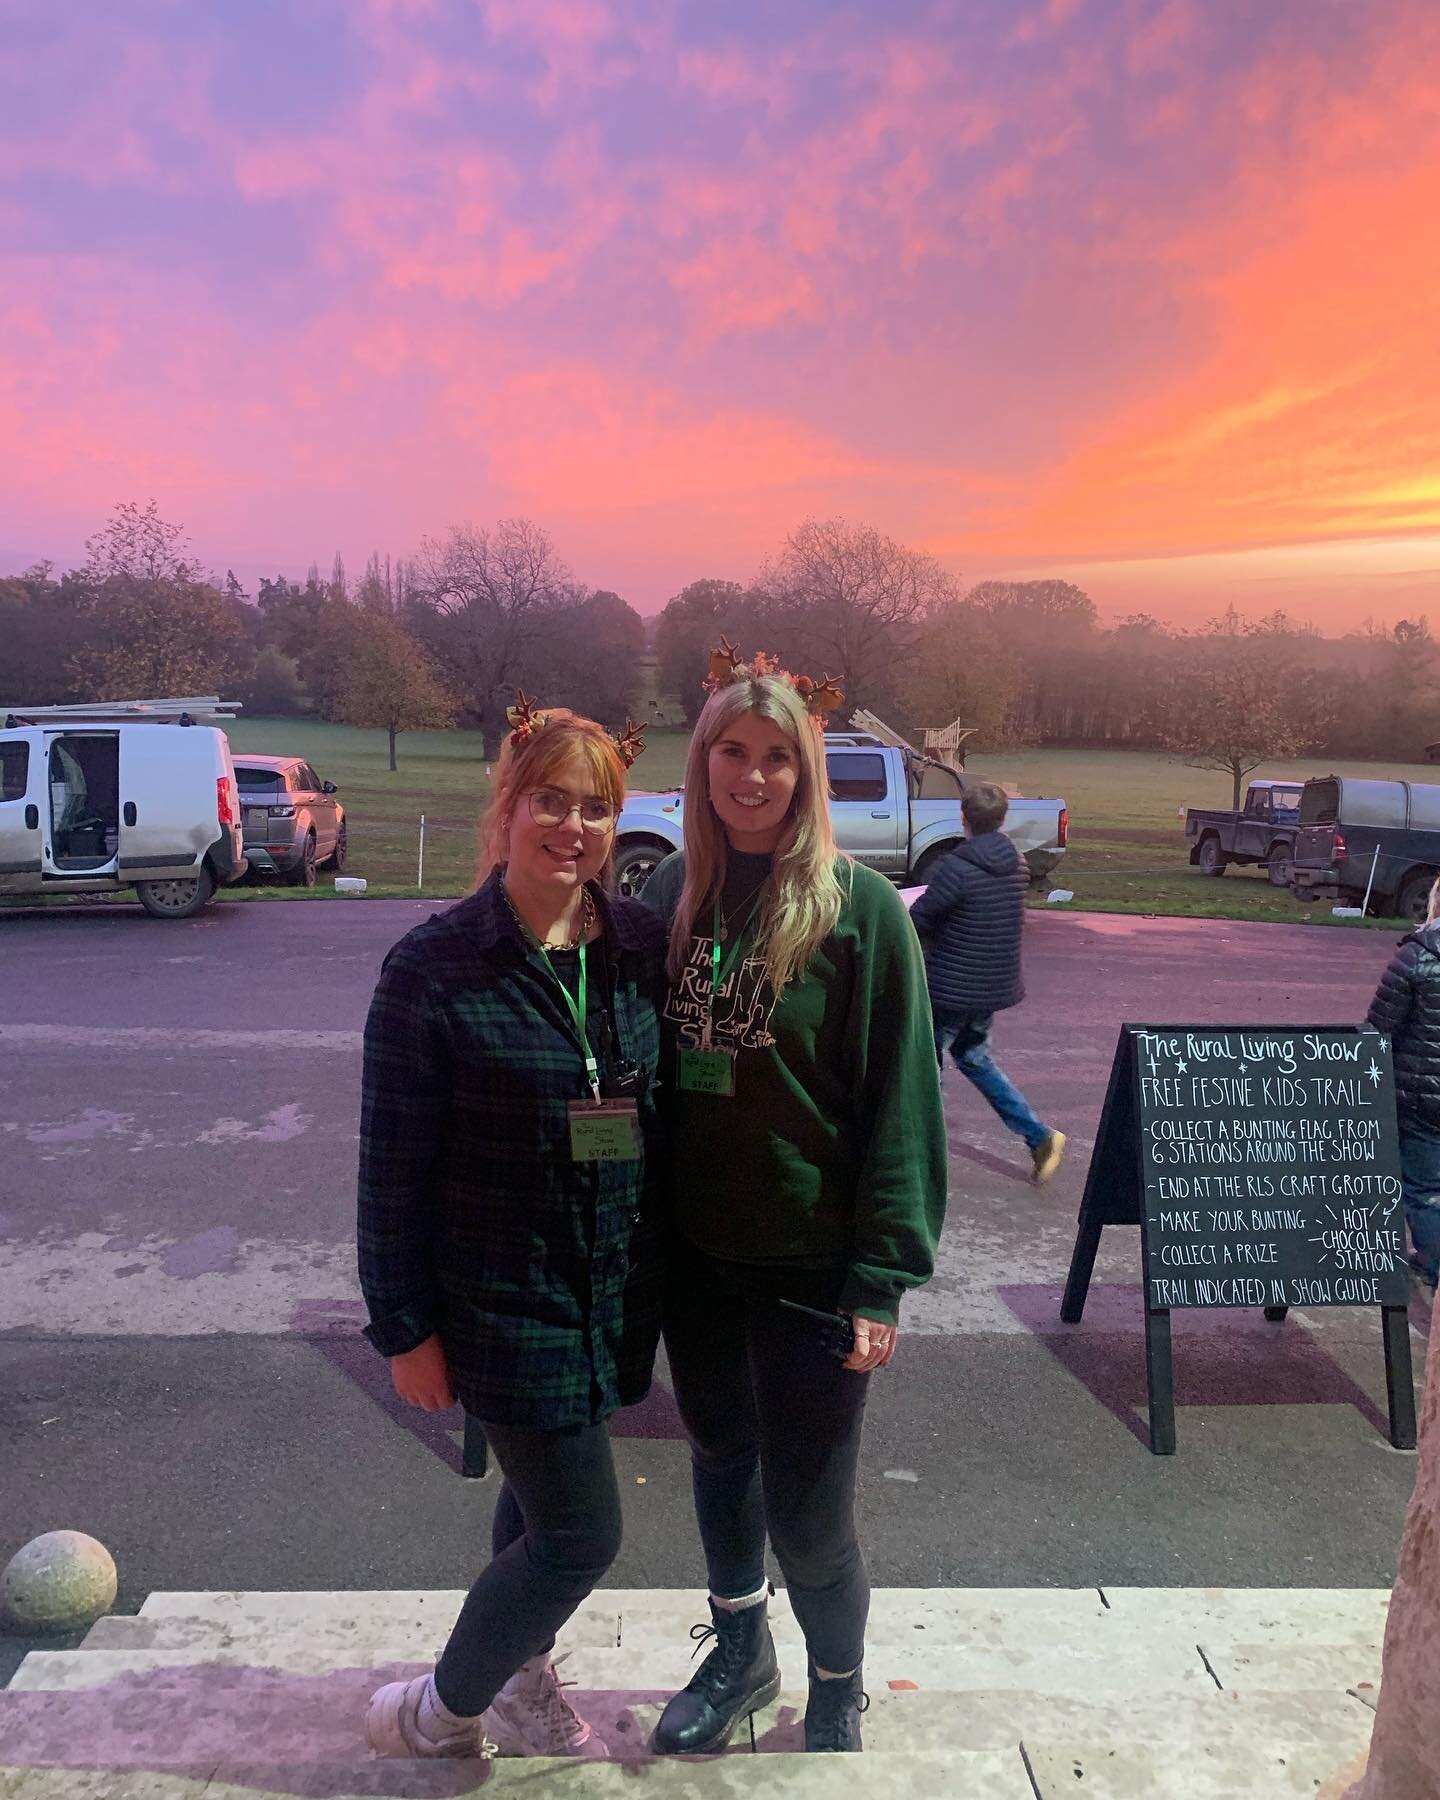 Beautiful set down sunset for @rurallivingshow this evening, and the perfect opportunity for our only picture together this weekend 🤣💚✨

THANK YOU TO ALL OF YOU.
💚 Our wonderful customers
💚 Our absolutely fantastic team
💚 And our hardworking, cr